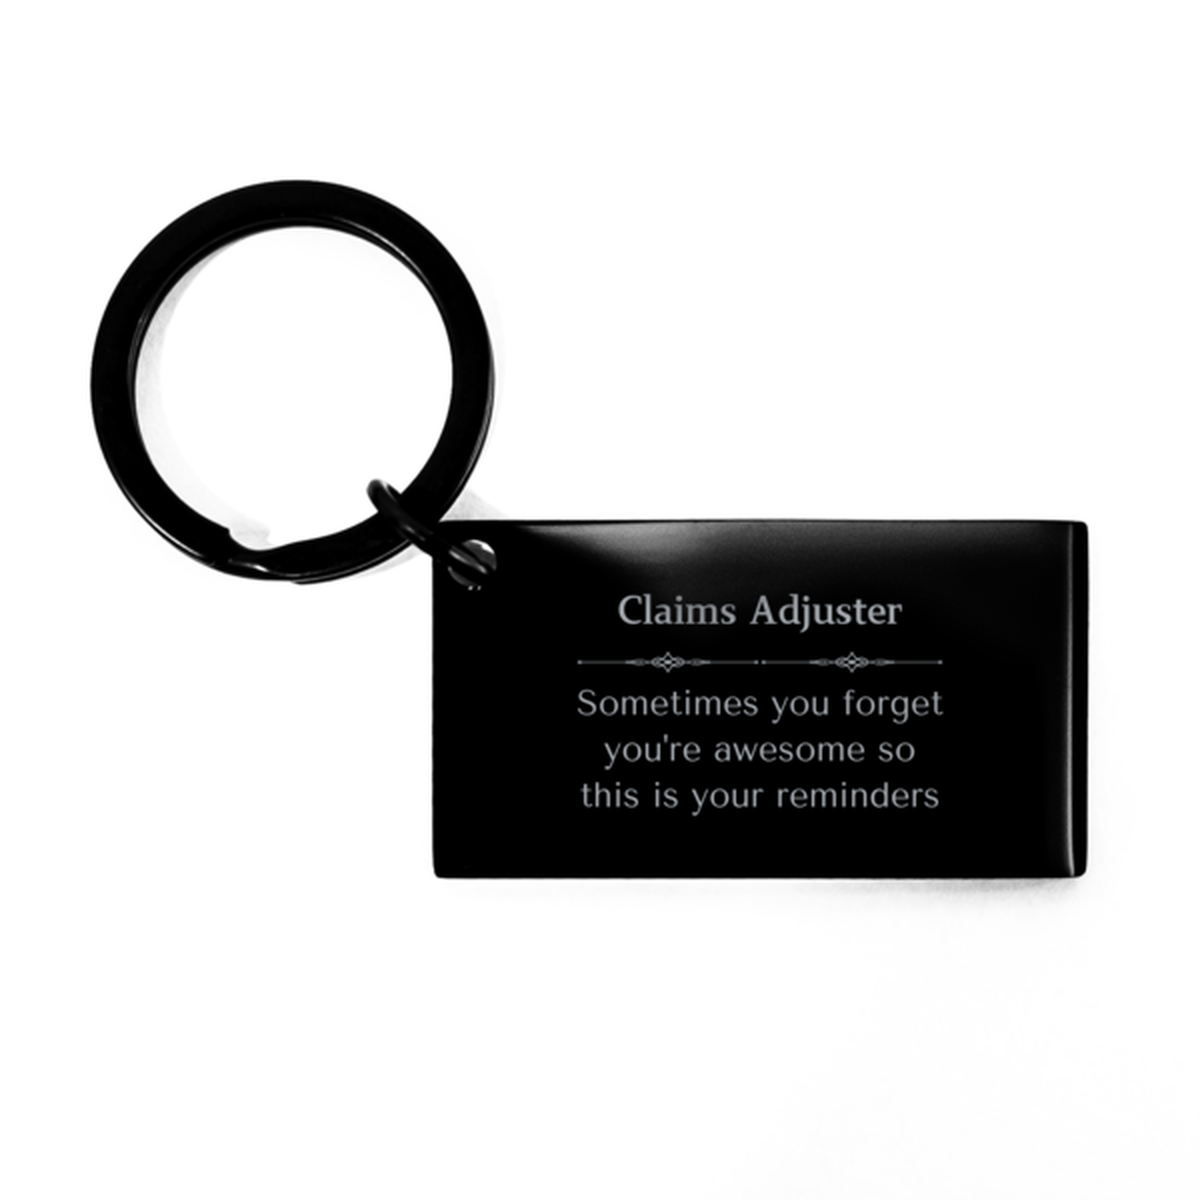 Sentimental Claims Adjuster Keychain, Drafter Sometimes you forget you're awesome so this is your reminders, Graduation Christmas Birthday Gifts for Claims Adjuster, Men, Women, Coworkers